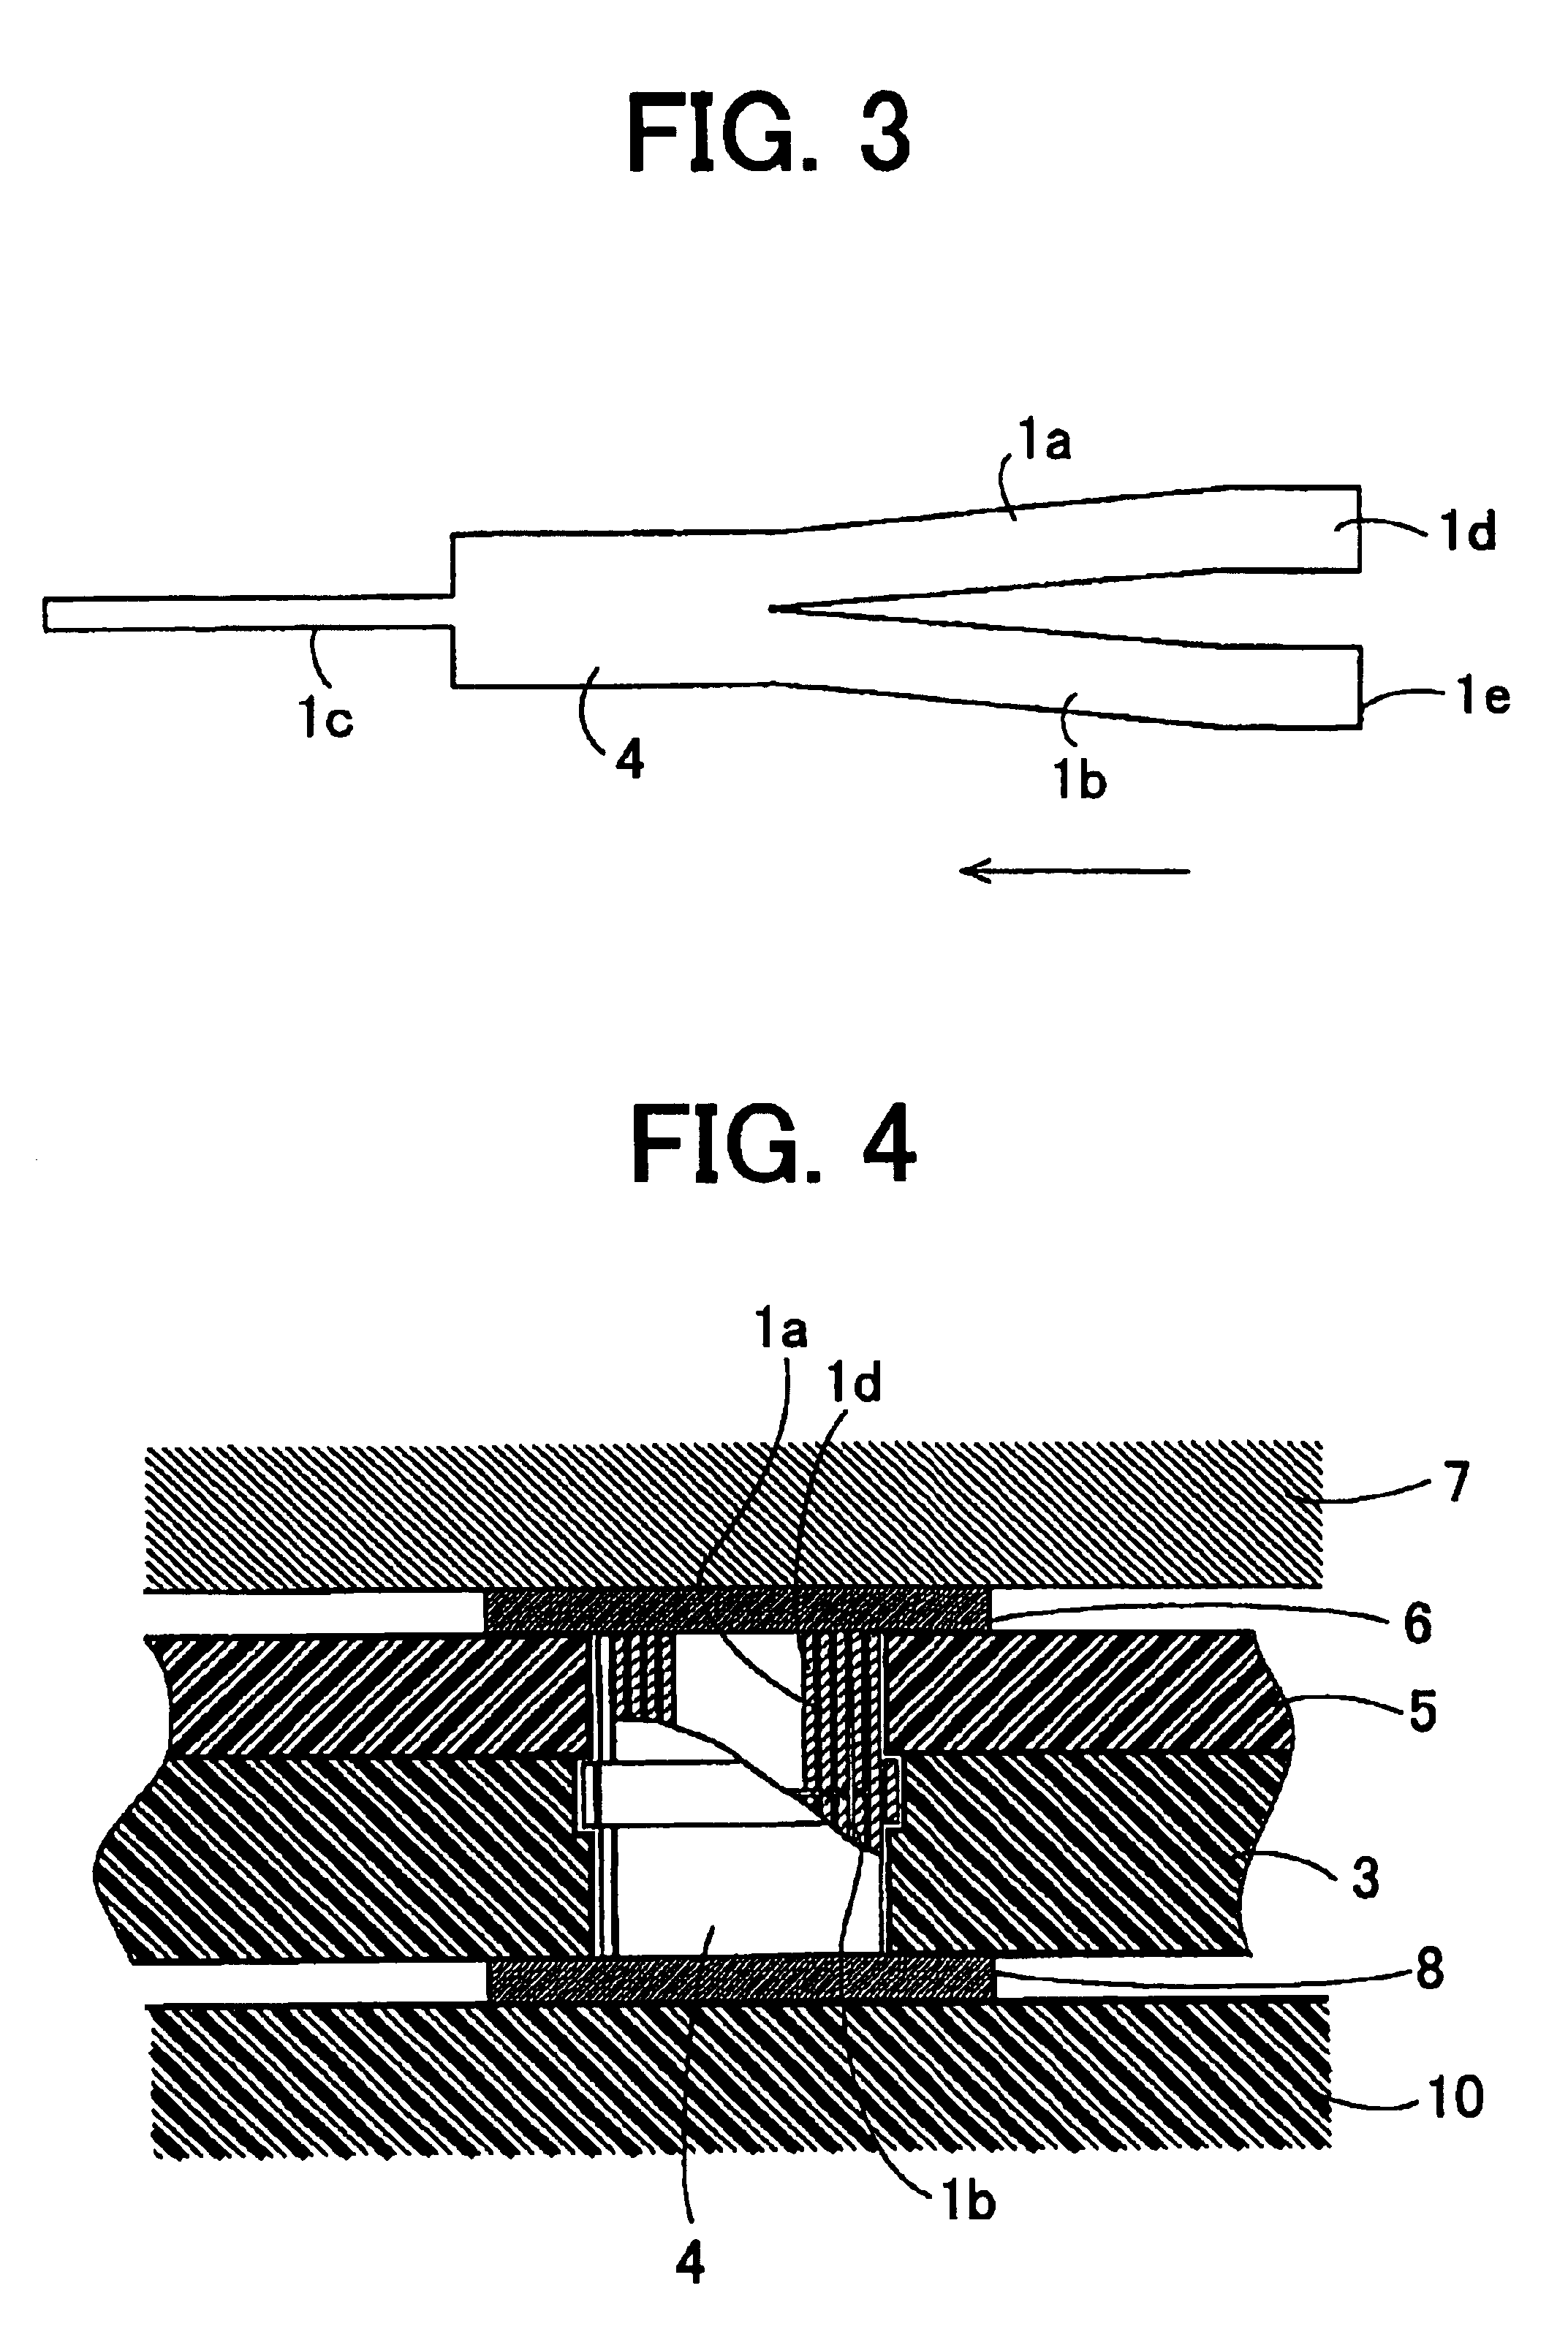 Electric connector for connecting electronic instruments